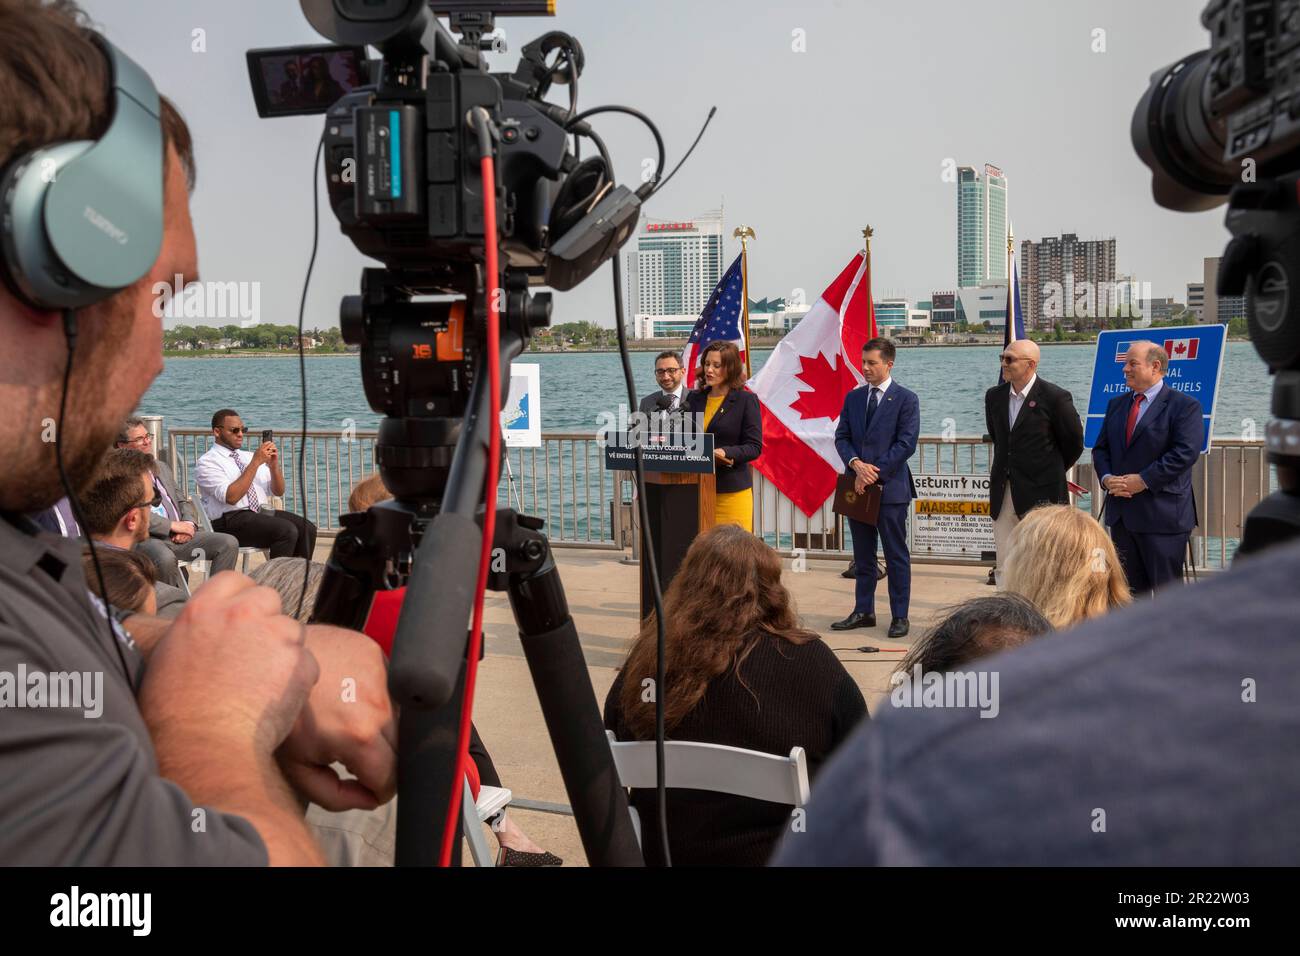 Detroit, Michigan, USA. 16th May, 2023. The United States and Canada announced plans for a binational electric vehicle corridor, with DC fast charging stations every 50 miles from Kalamazoo, Michigan to Quebec City, Quebec. Making the announcement at a dock on the Detroit River (with Canada across the river) were U.S. Transportation Secretary Pete Buttigieg and Canadian Minister of Transport Omar Alghabra, along with Michigan Governor Gretchen Whitmer, IBEW member William Baisden, and Detroit Mayor Mike Duggan. Credit: Jim West/Alamy Live News Stock Photo